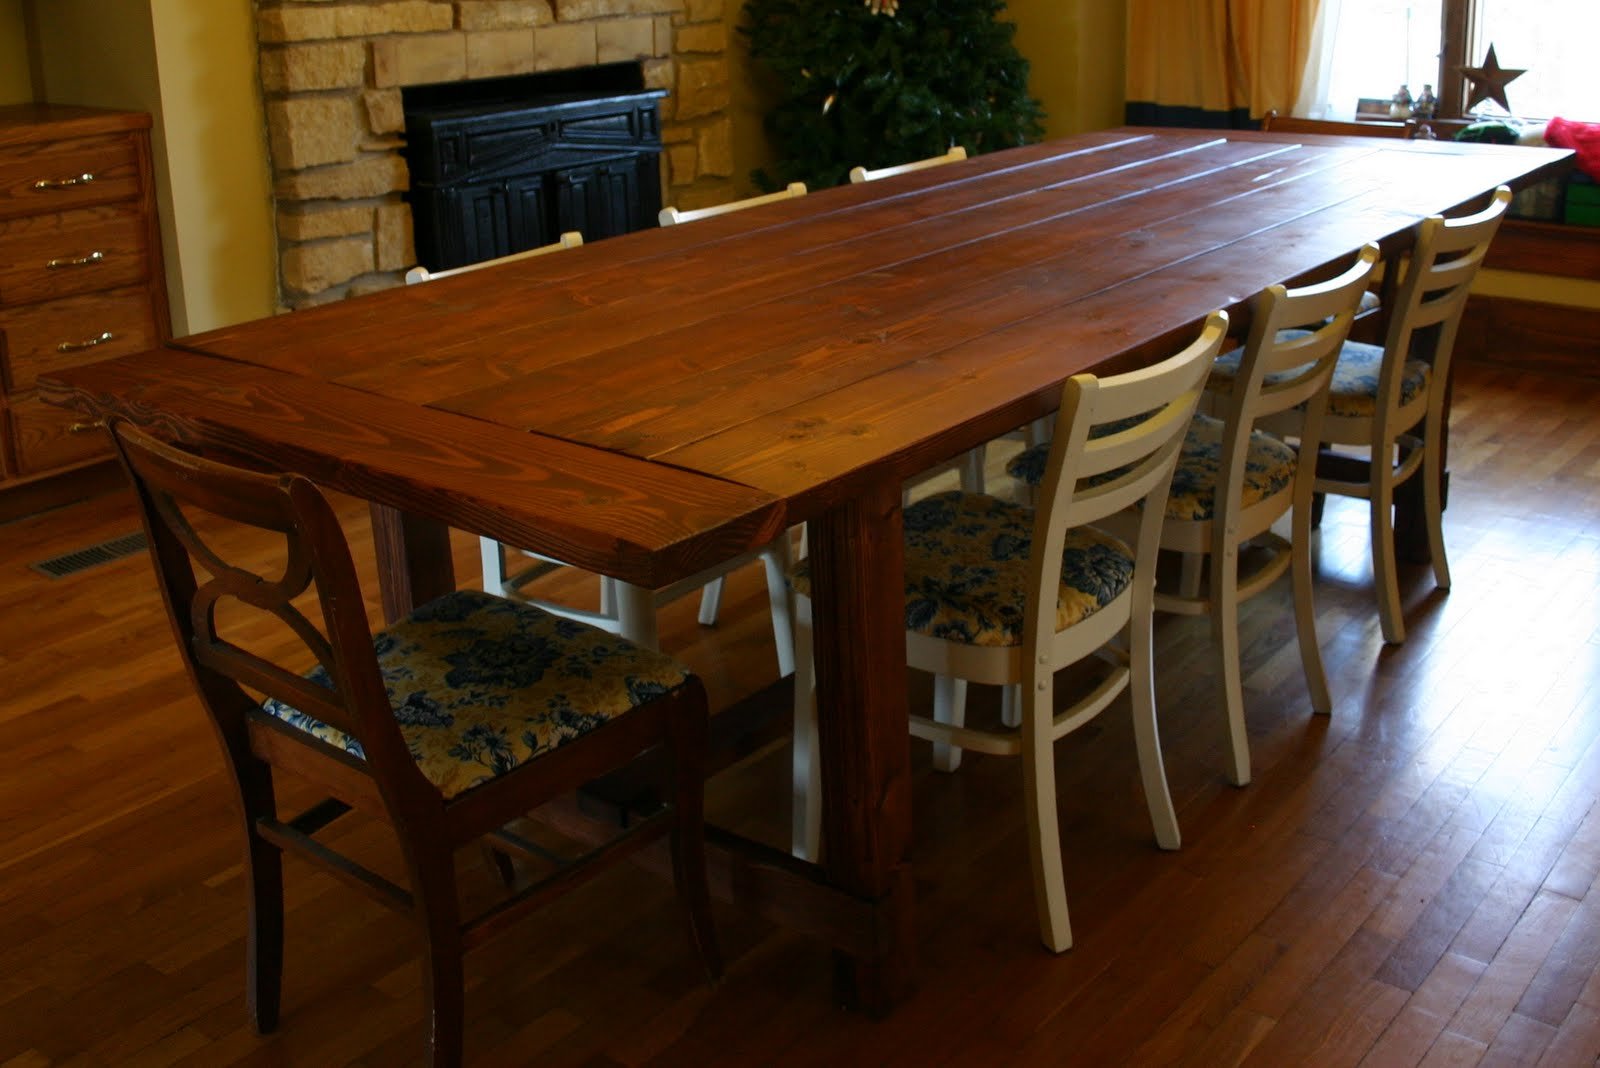 Free Rectangular Dining Room Table Plans